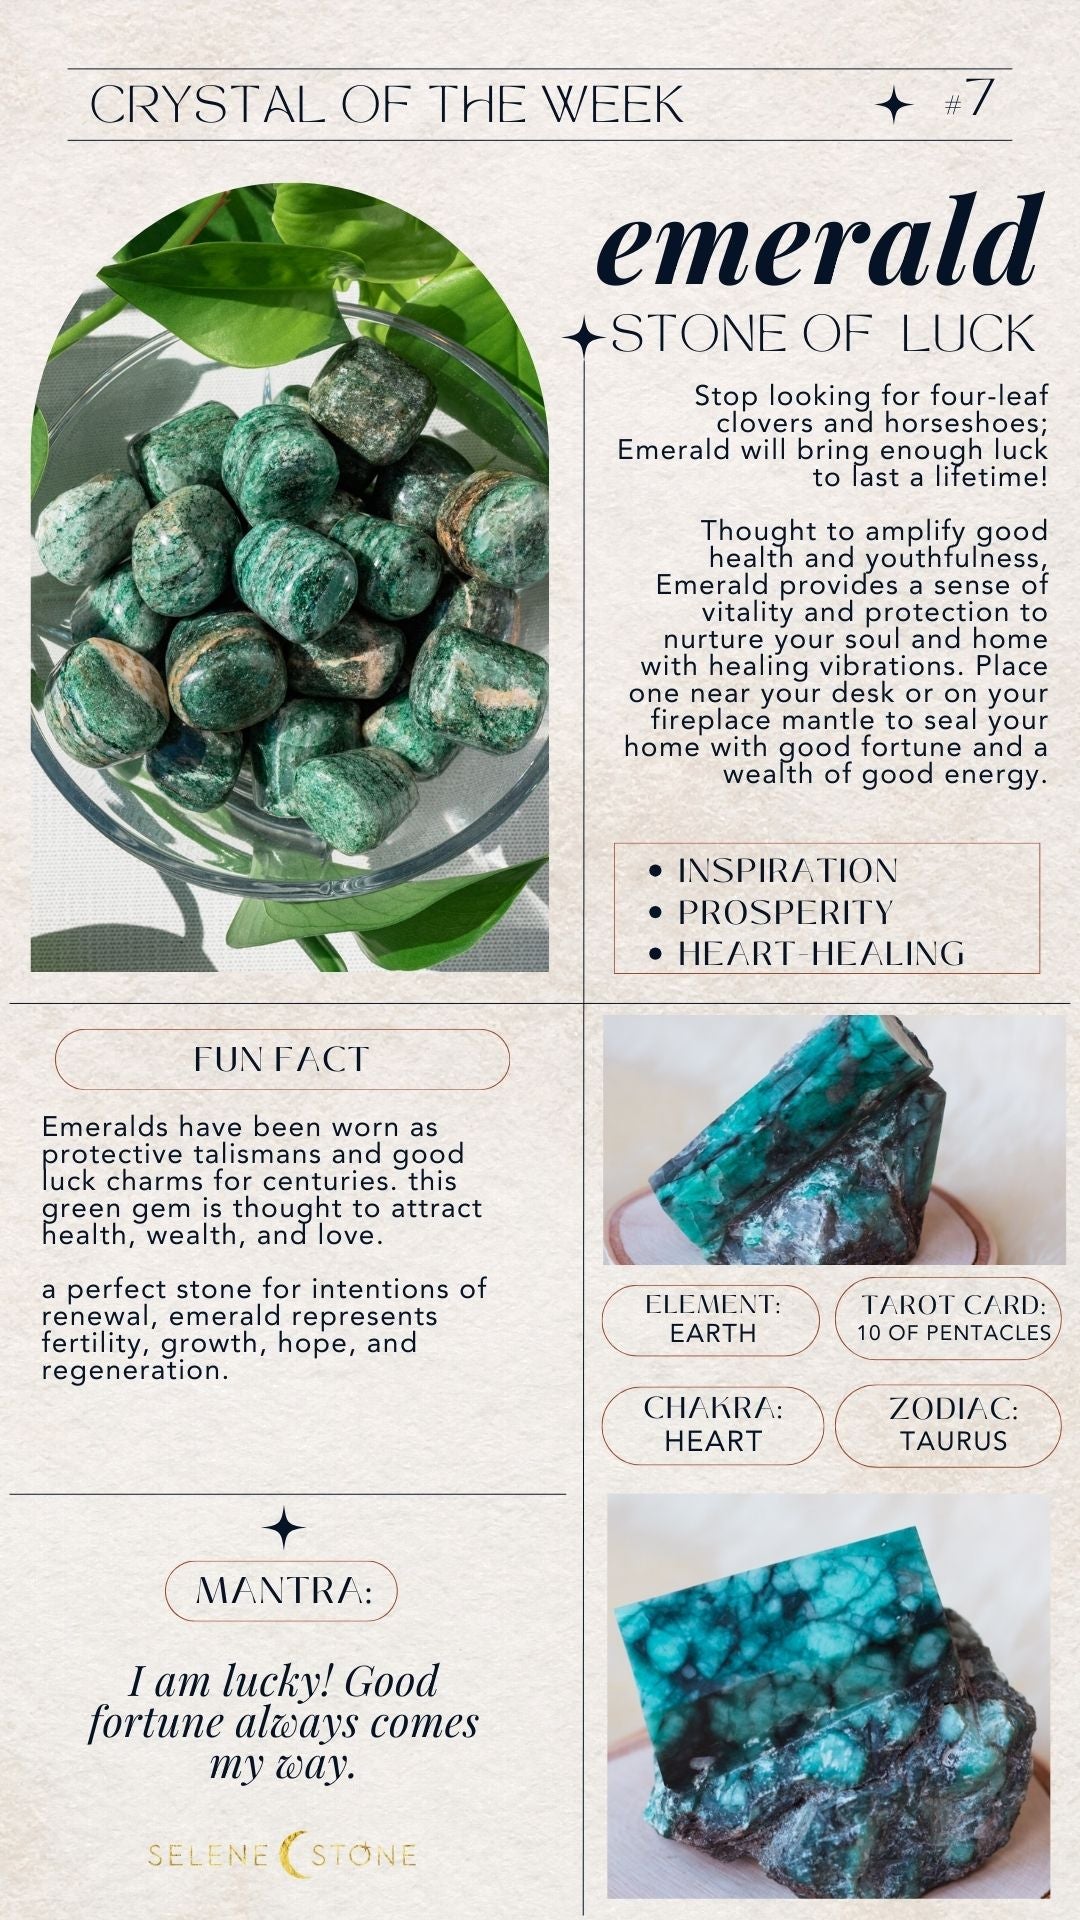 Emerald's crystal properties make emerald a stone of luck. Emerald is great for prosperity, inspiration, and heart-healing.